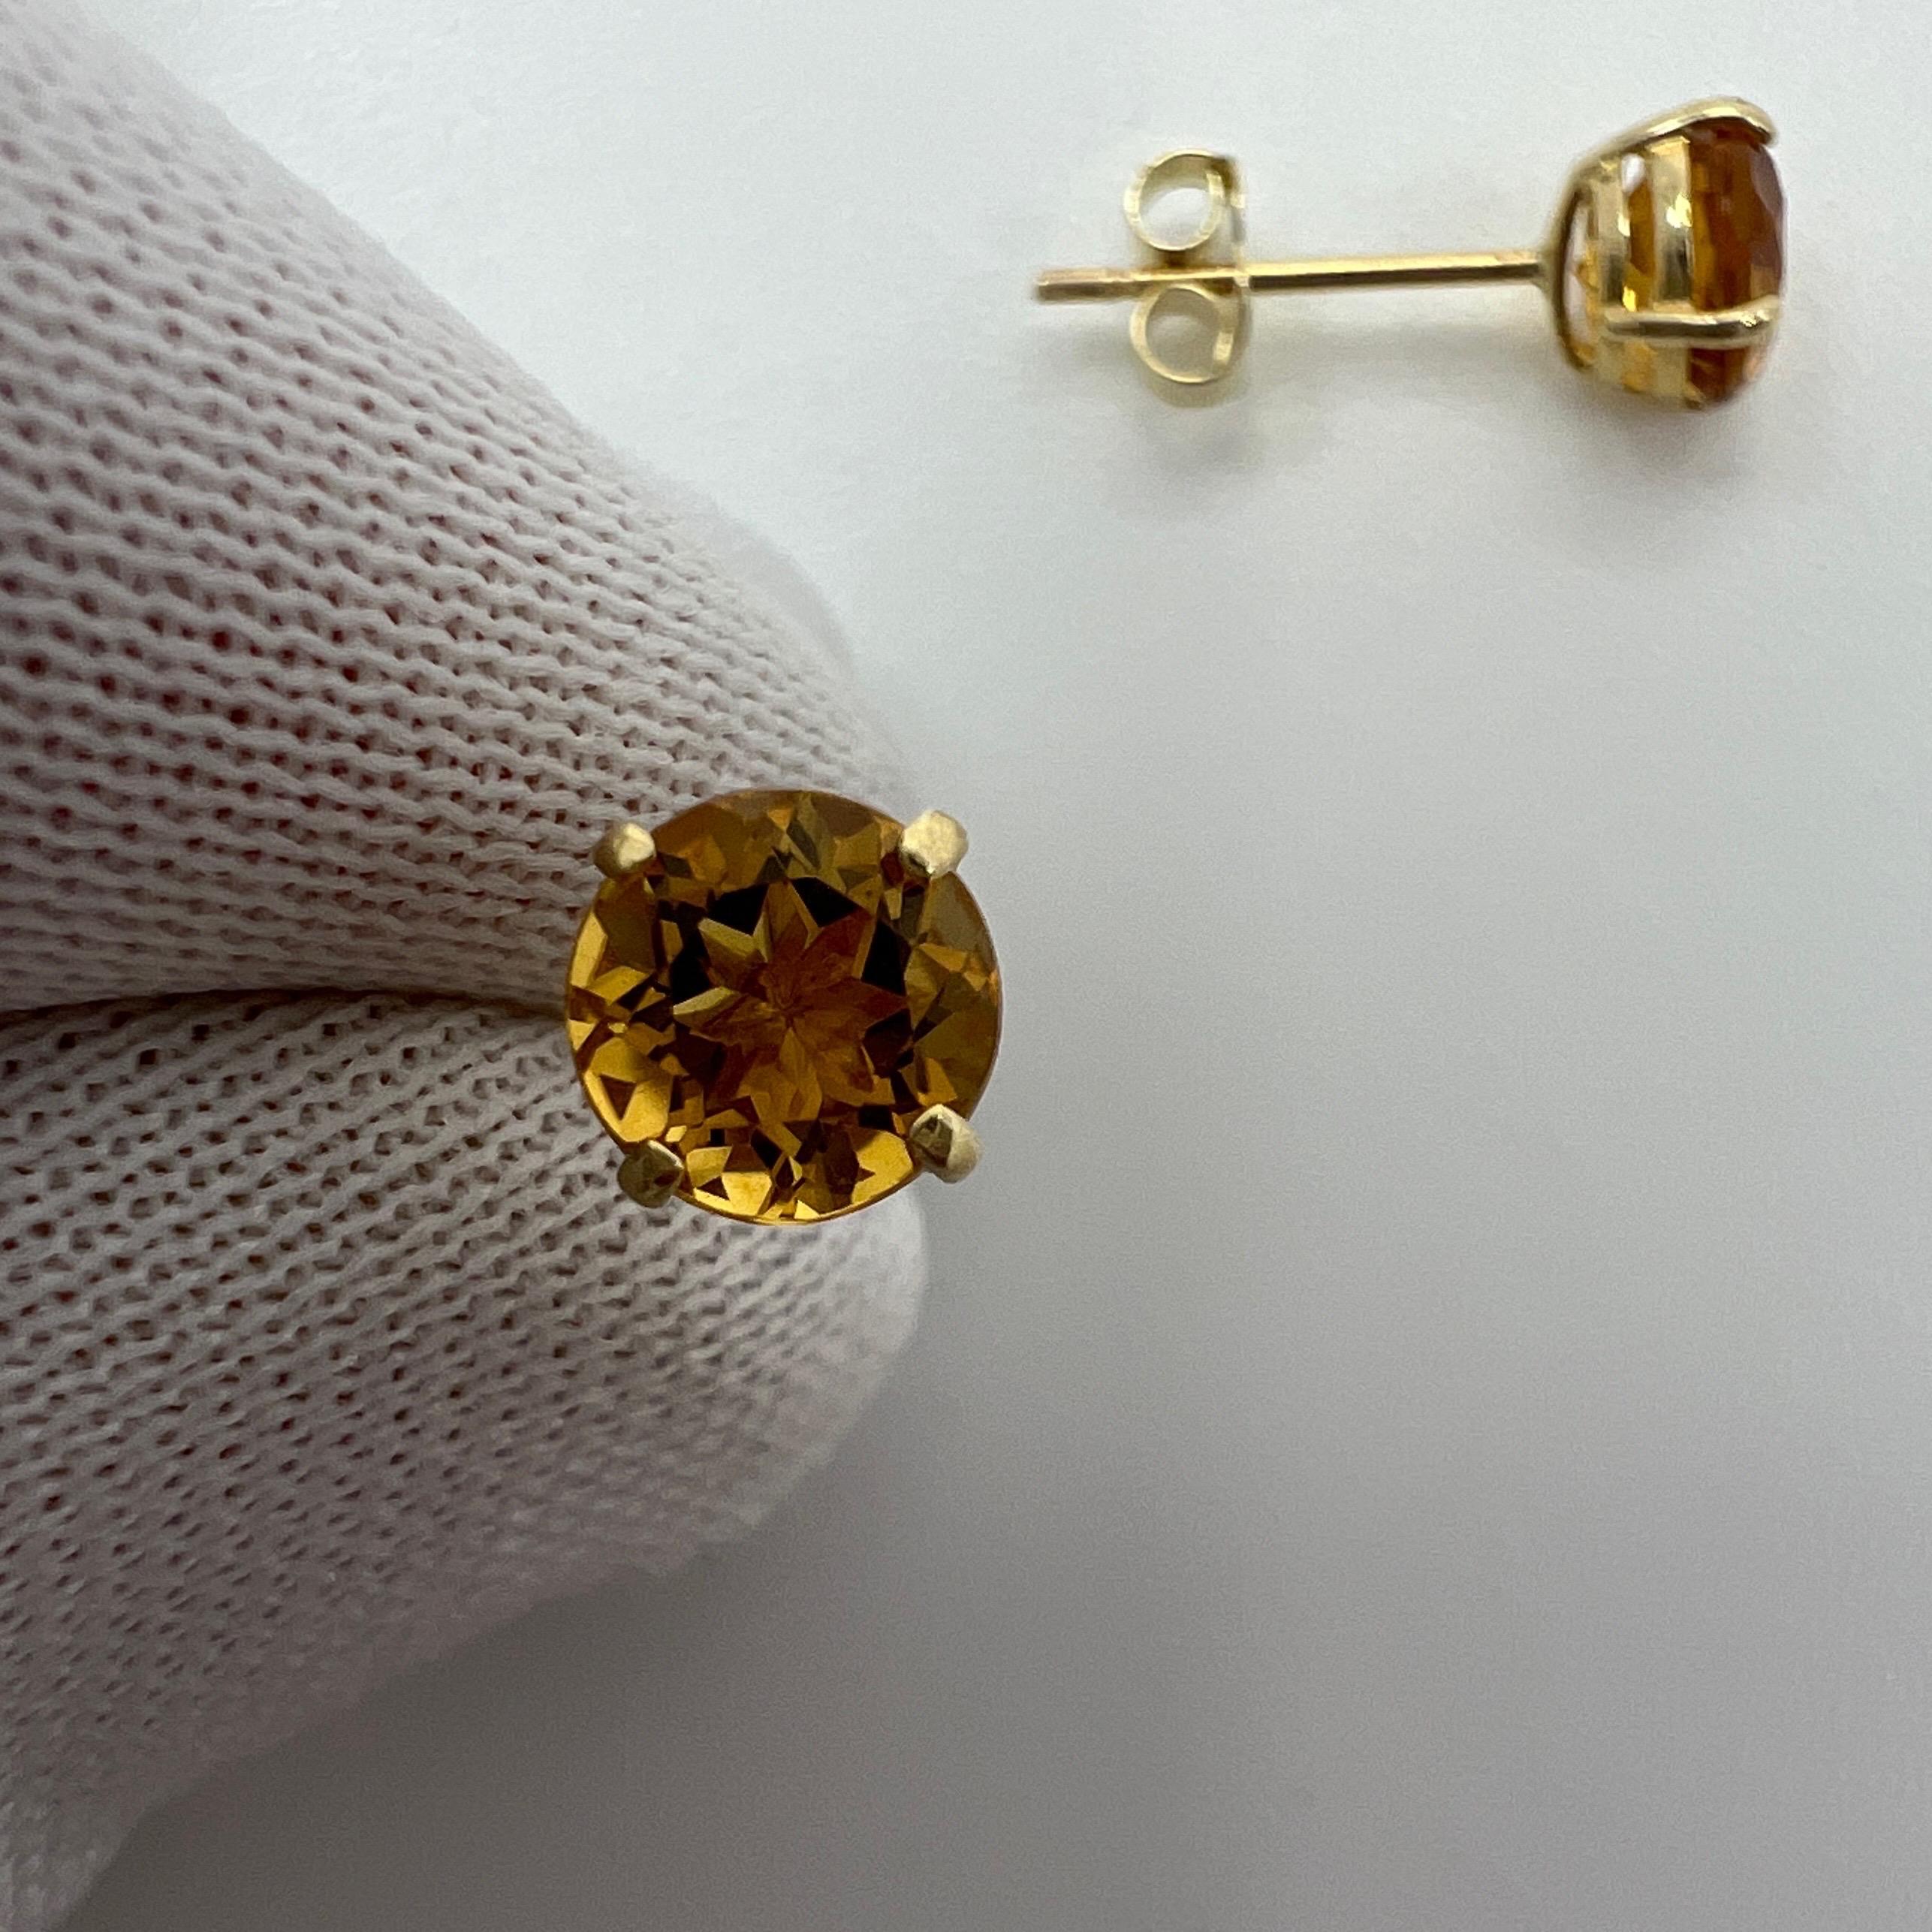 Natural Orange Yellow Champagne Topaz Yellow Gold Earring Studs.

1.15 Carat total. Beautiful 5mm matching pair of round topaz with a vivid orange-yellow champagne colour, excellent clarity and an excellent round brilliant cut.

The gemstones may